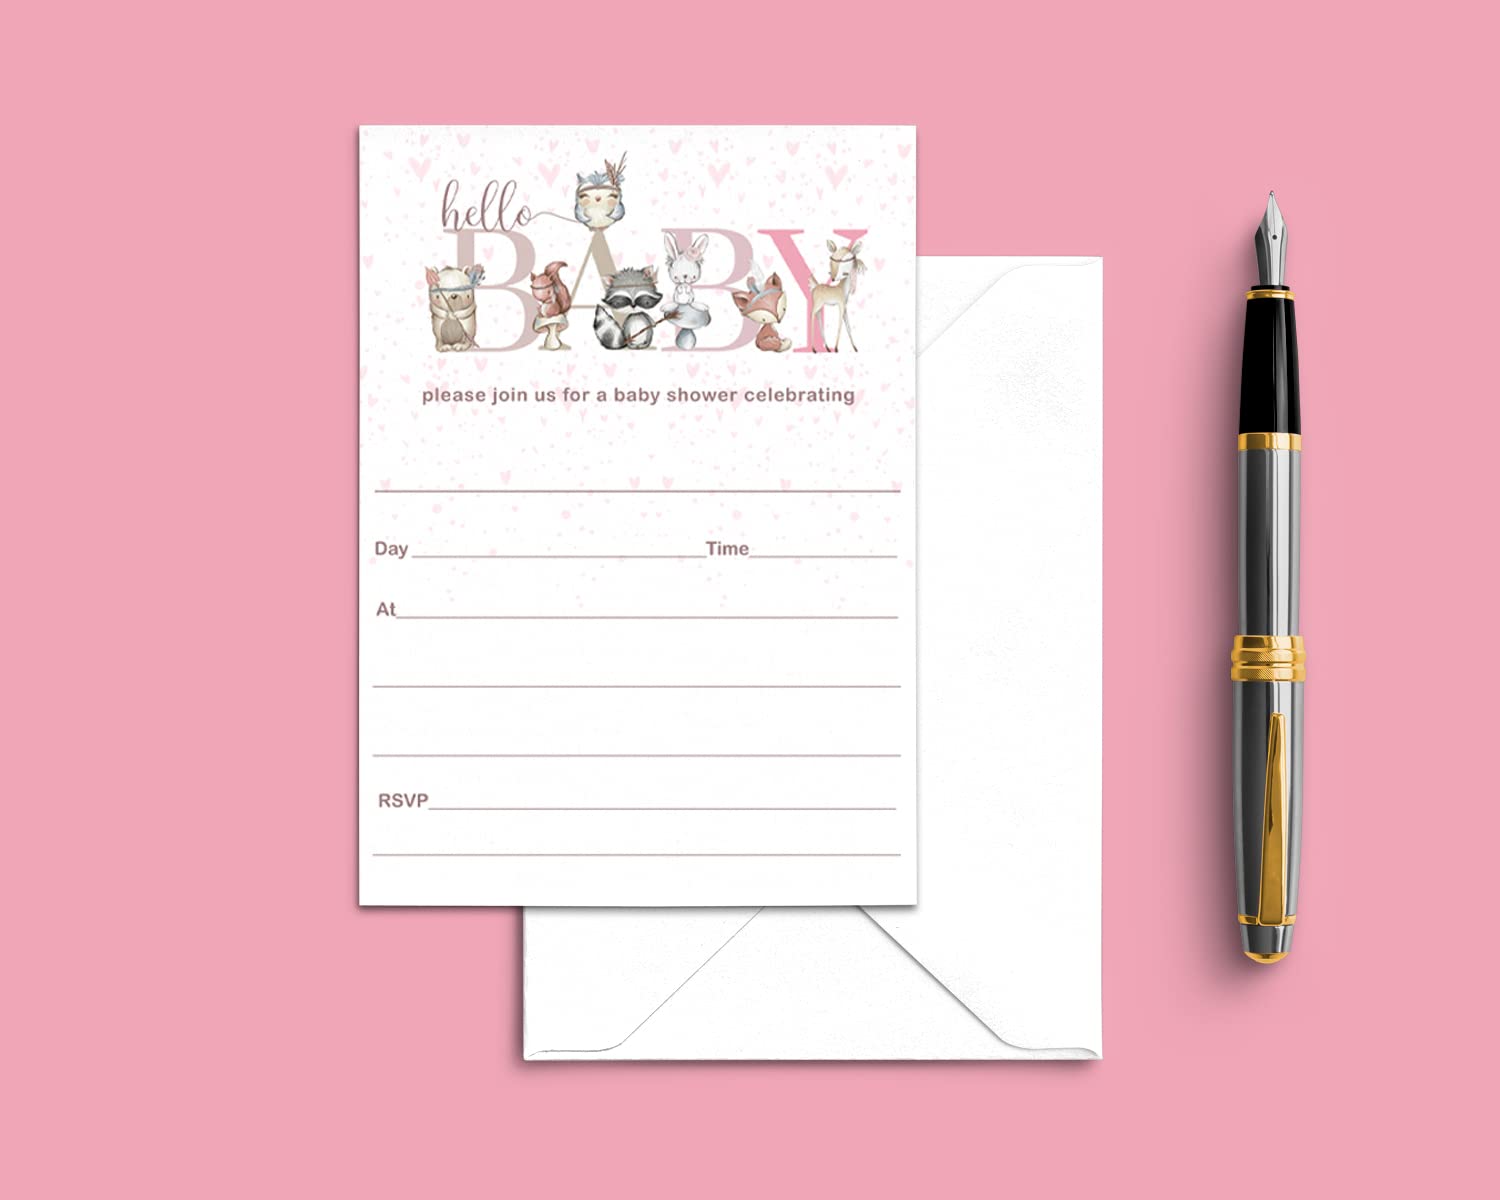 Woodland Friends Invitations with Envelopes (25 Pack) Baby Shower Invitation for Girls Pink, Rustic, Floral or Animal Event Theme – Printed Blank Invites to Handwrite Party Details DIY